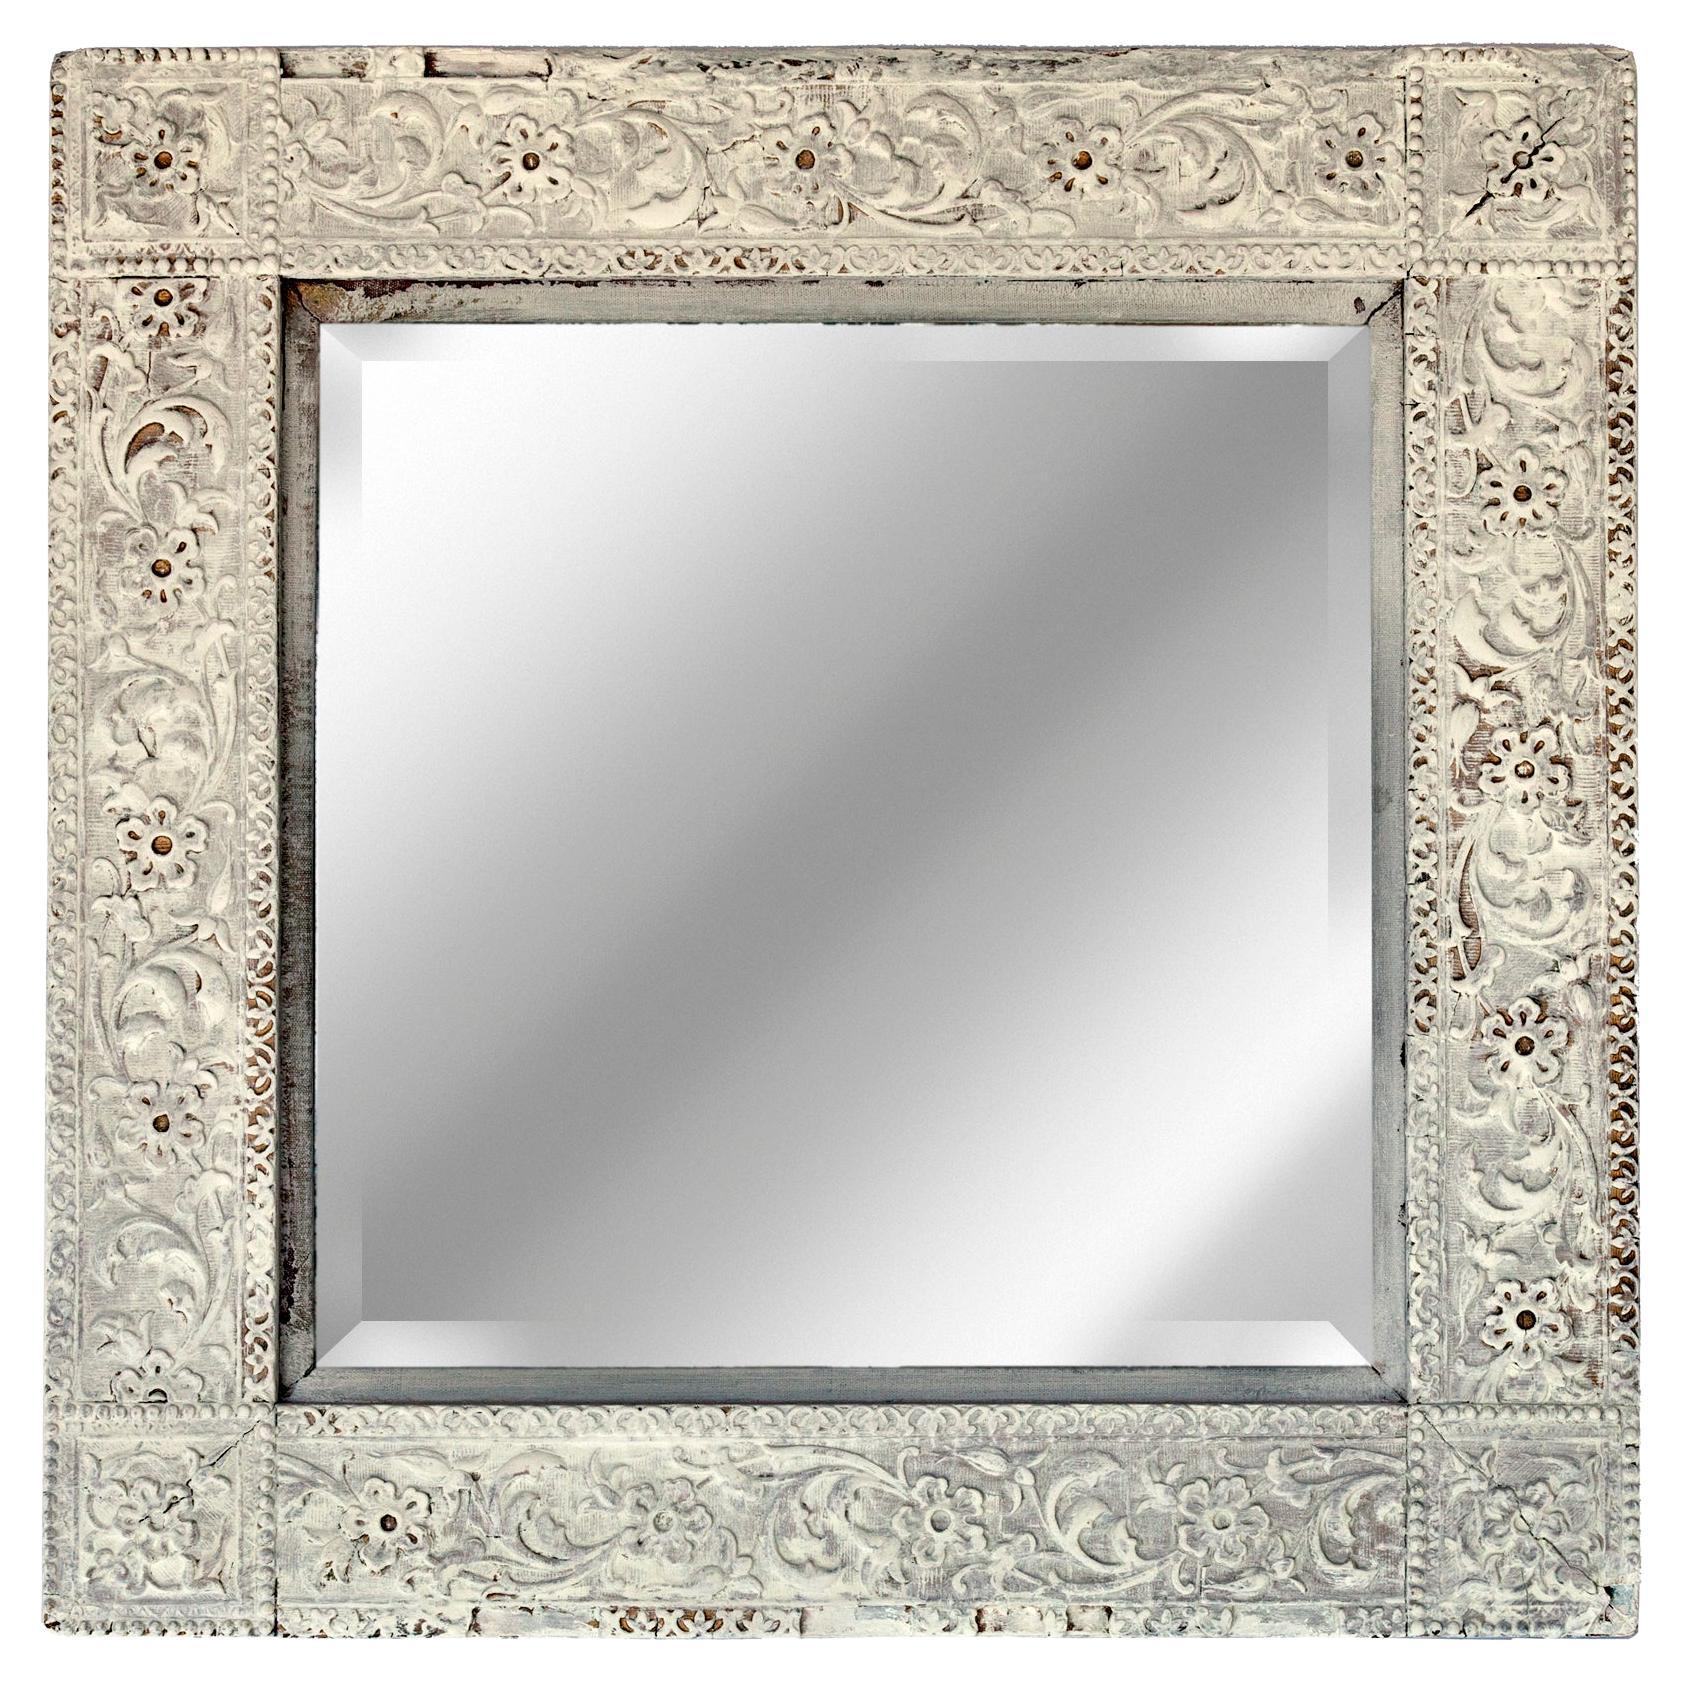 Early Victorian Square Beveled Mirror in Antique White 